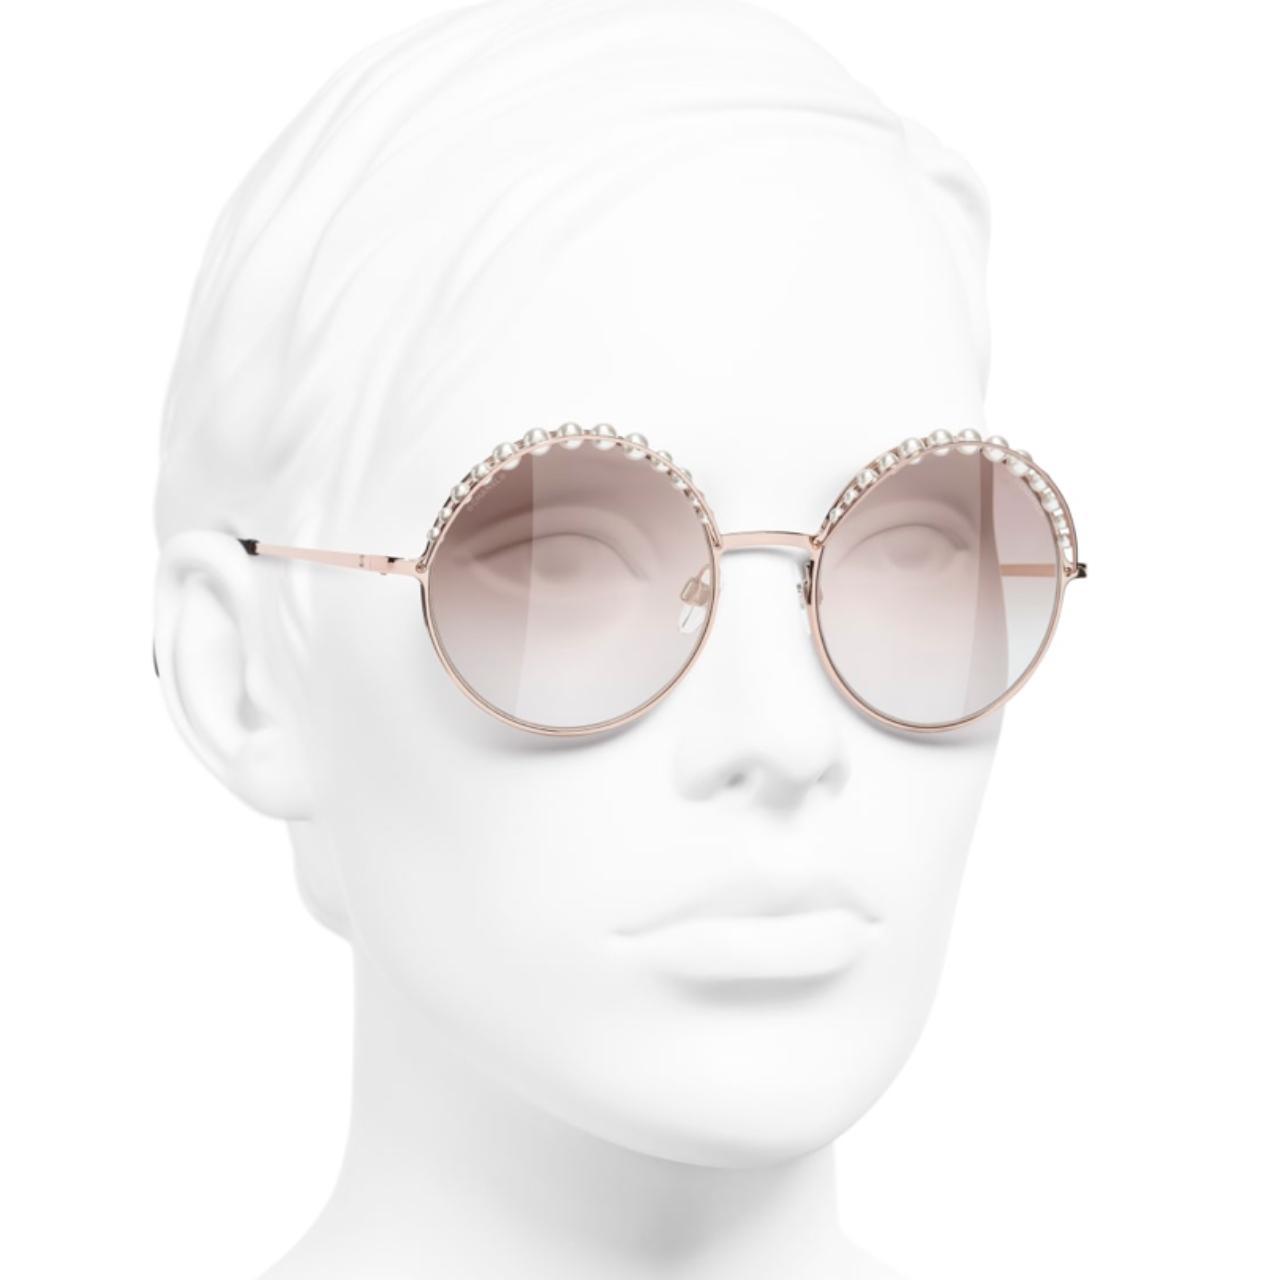 Chanel - Round Sunglasses with Pearl Detailing, RRP